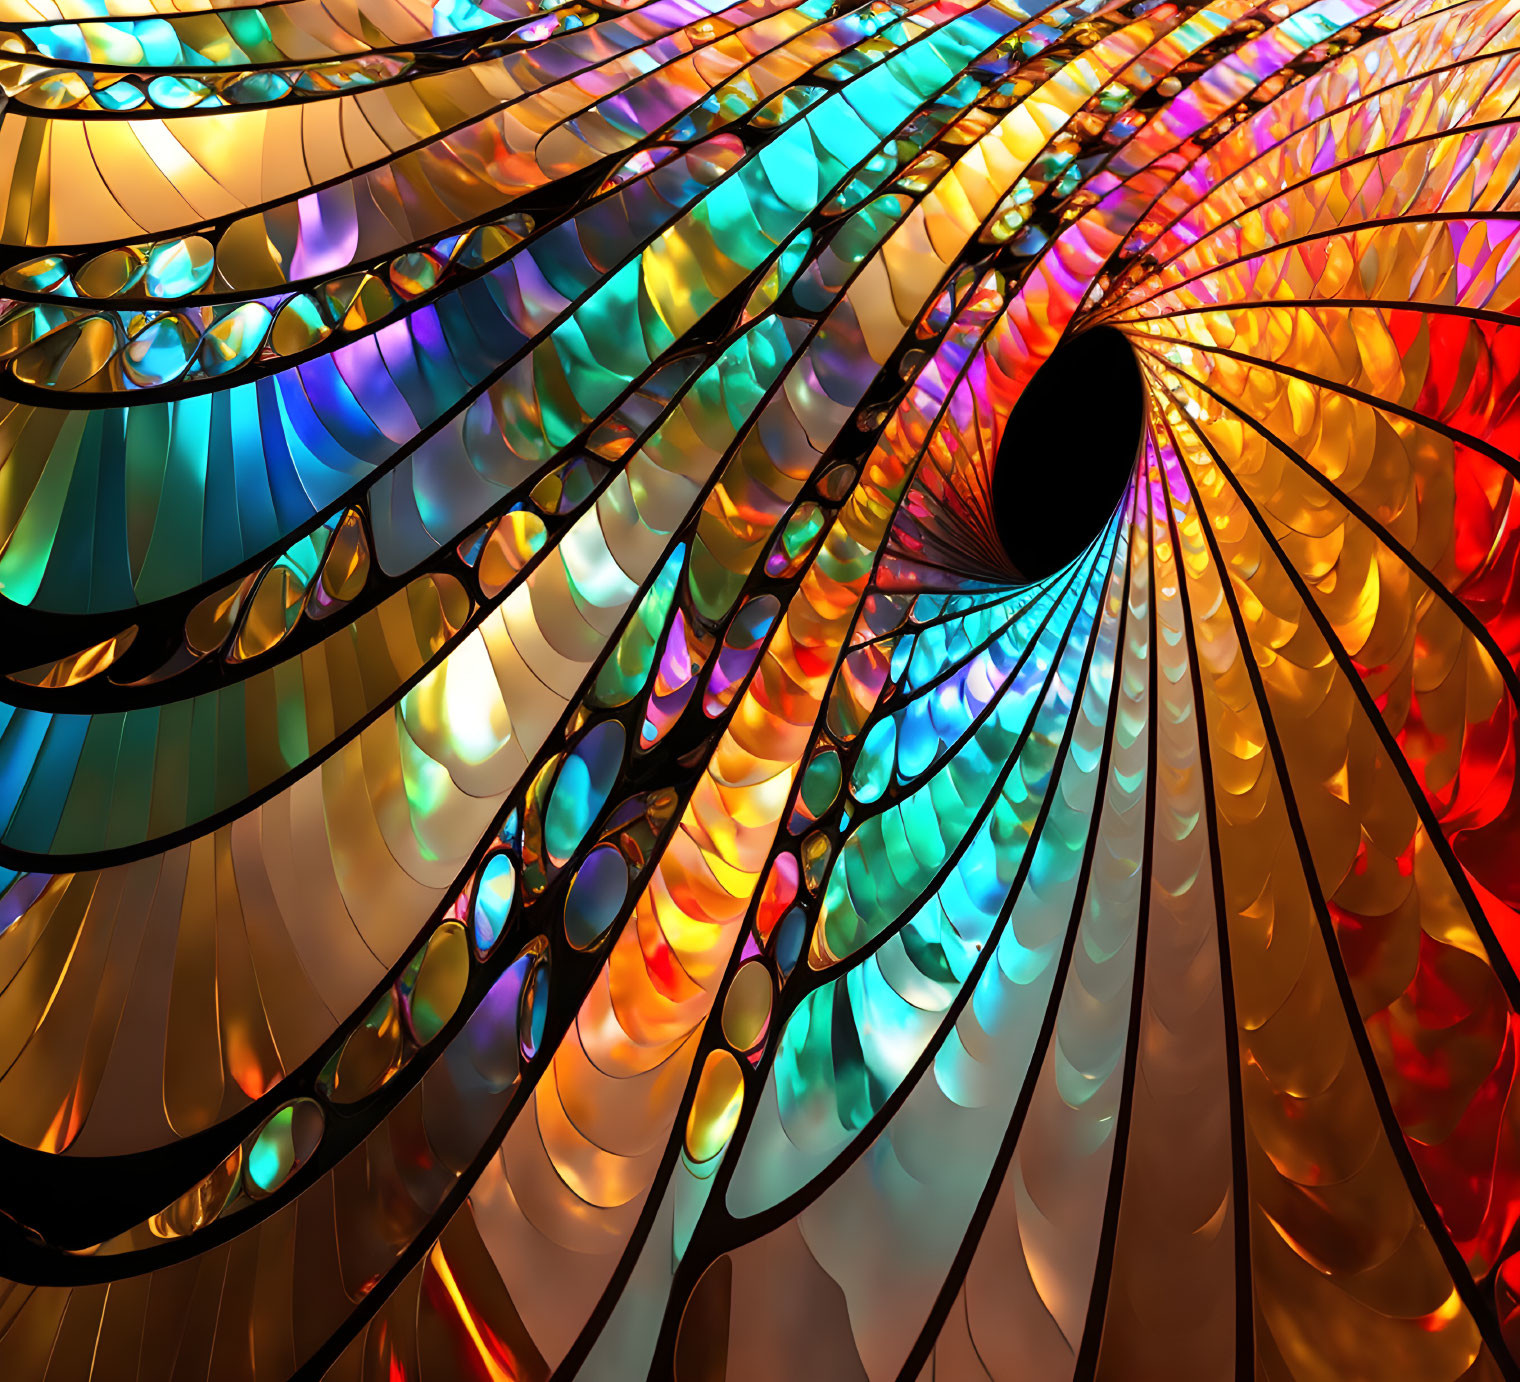 Fractal tunnel digital art with iridescent colors and spiraling pattern